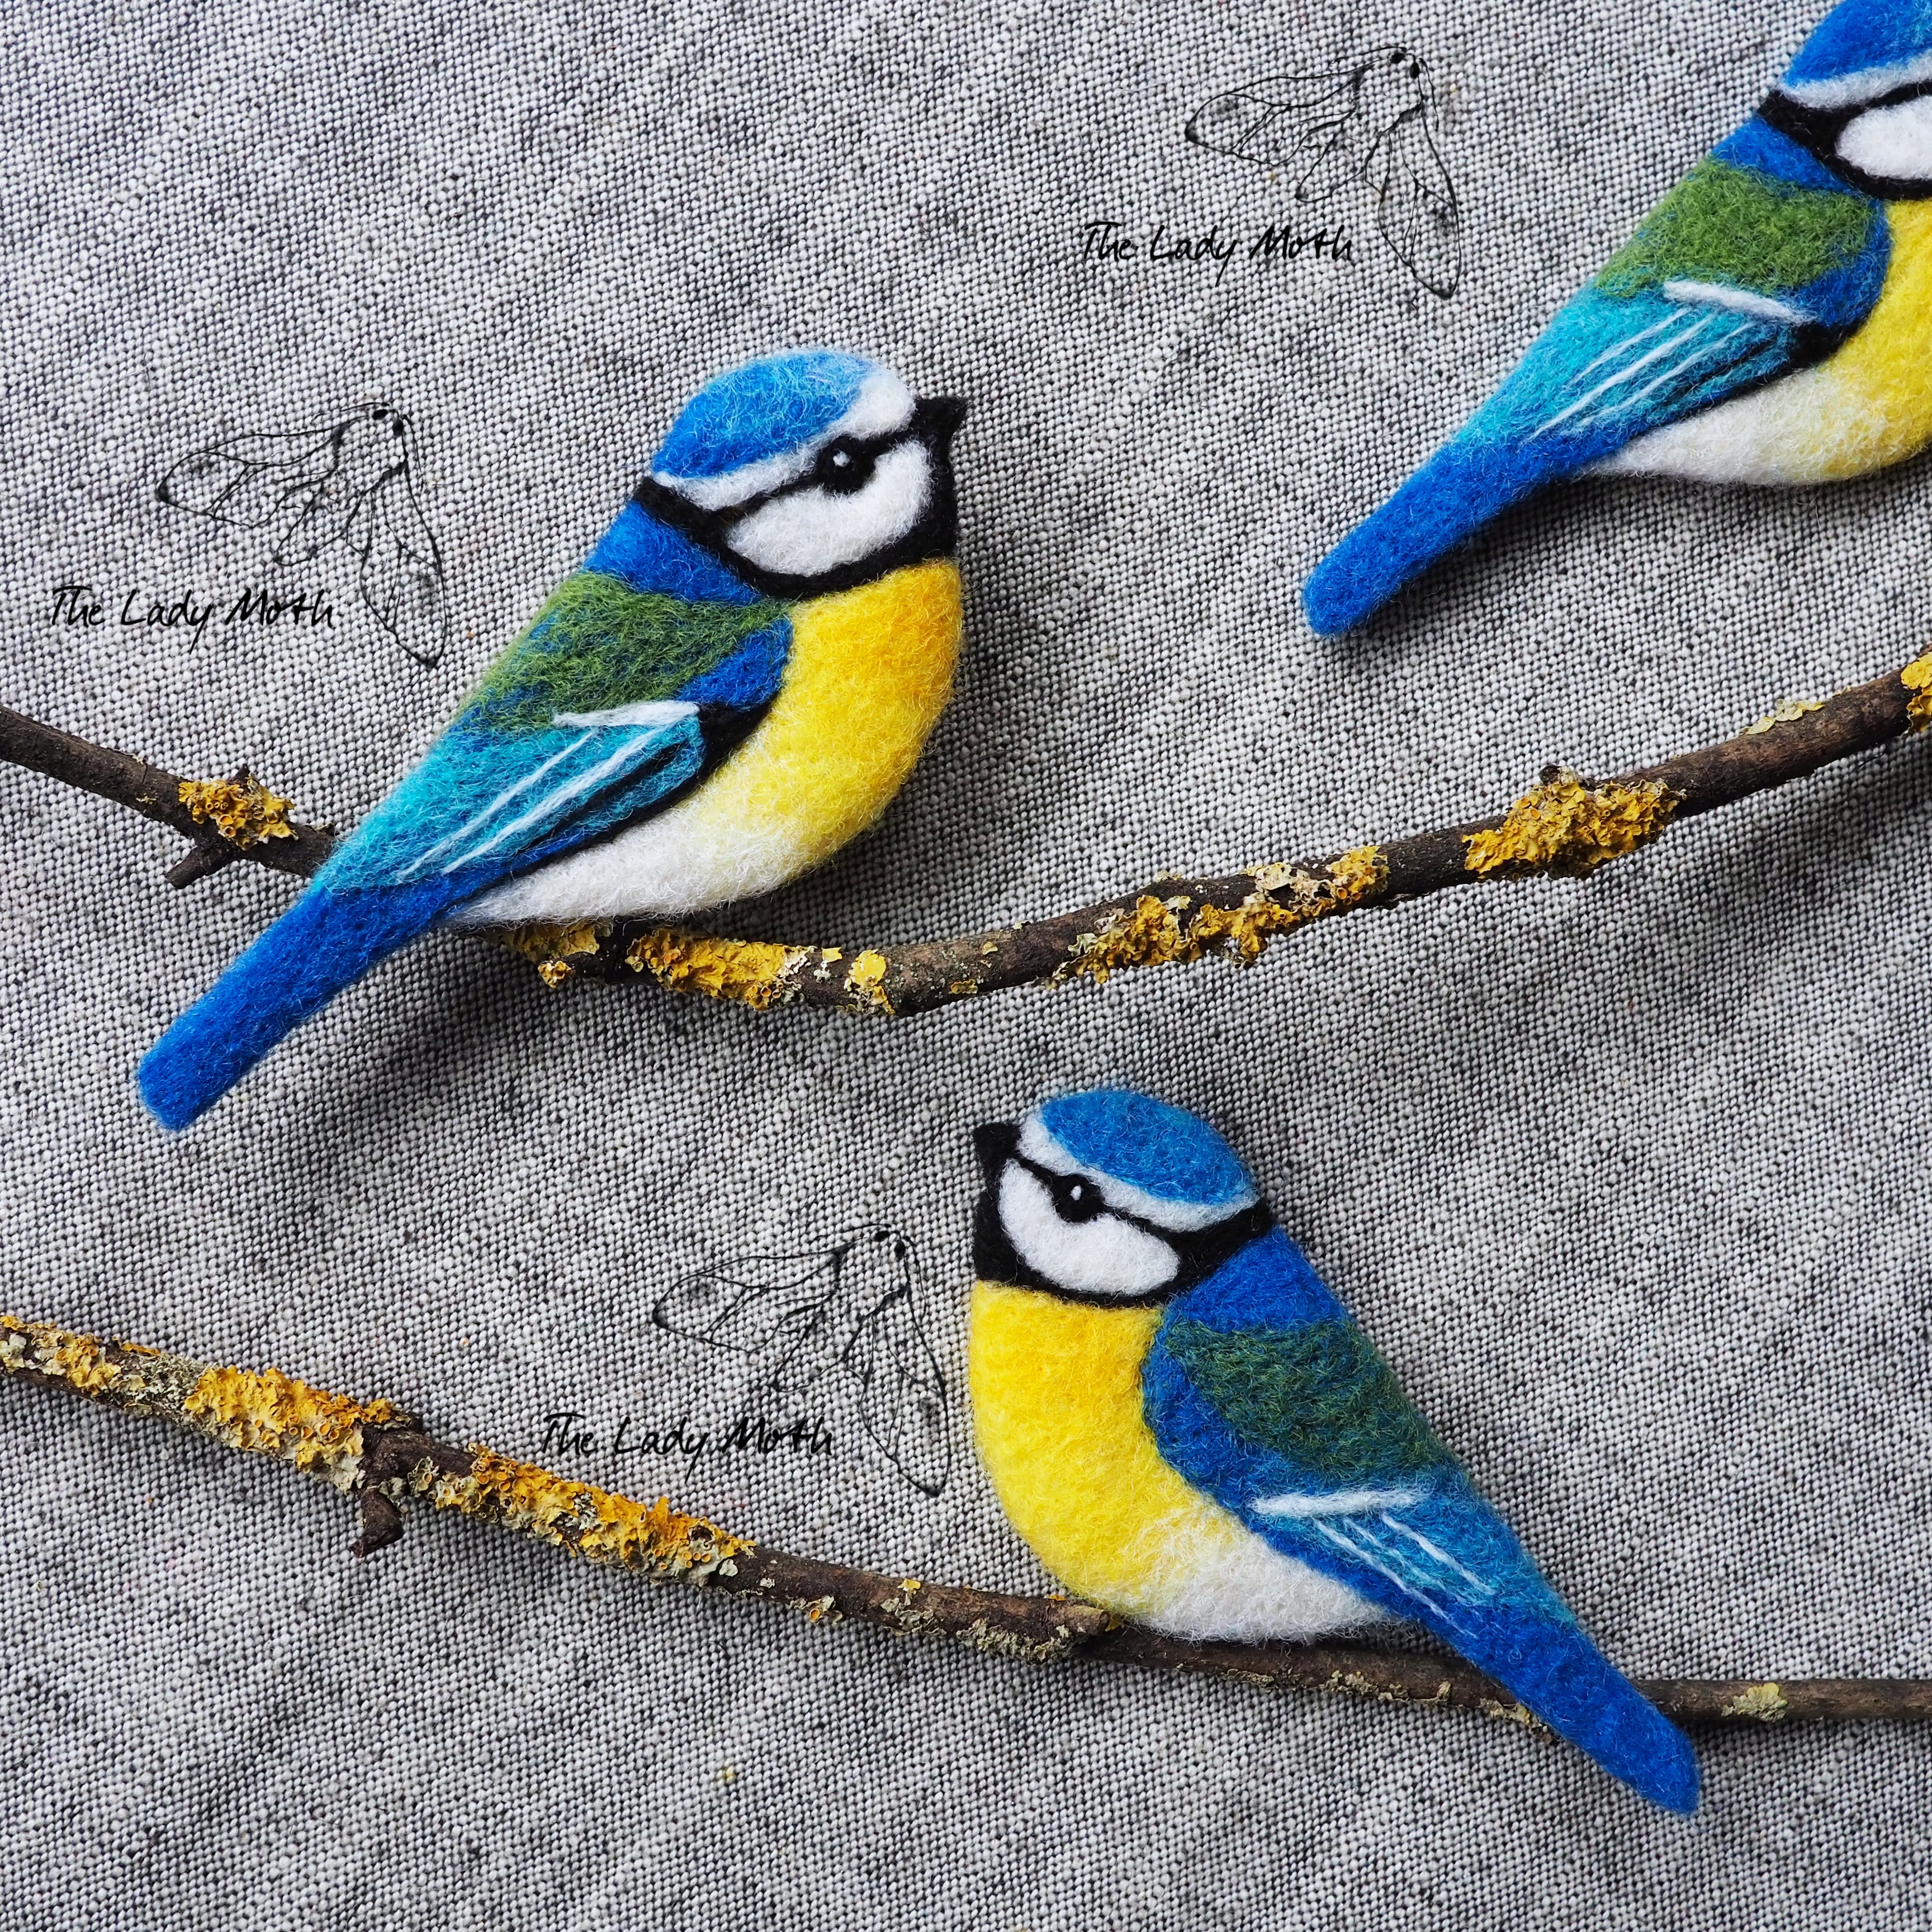 Workshop in a Box - Needle Felted Blue Tit Brooch by The Lady Moth